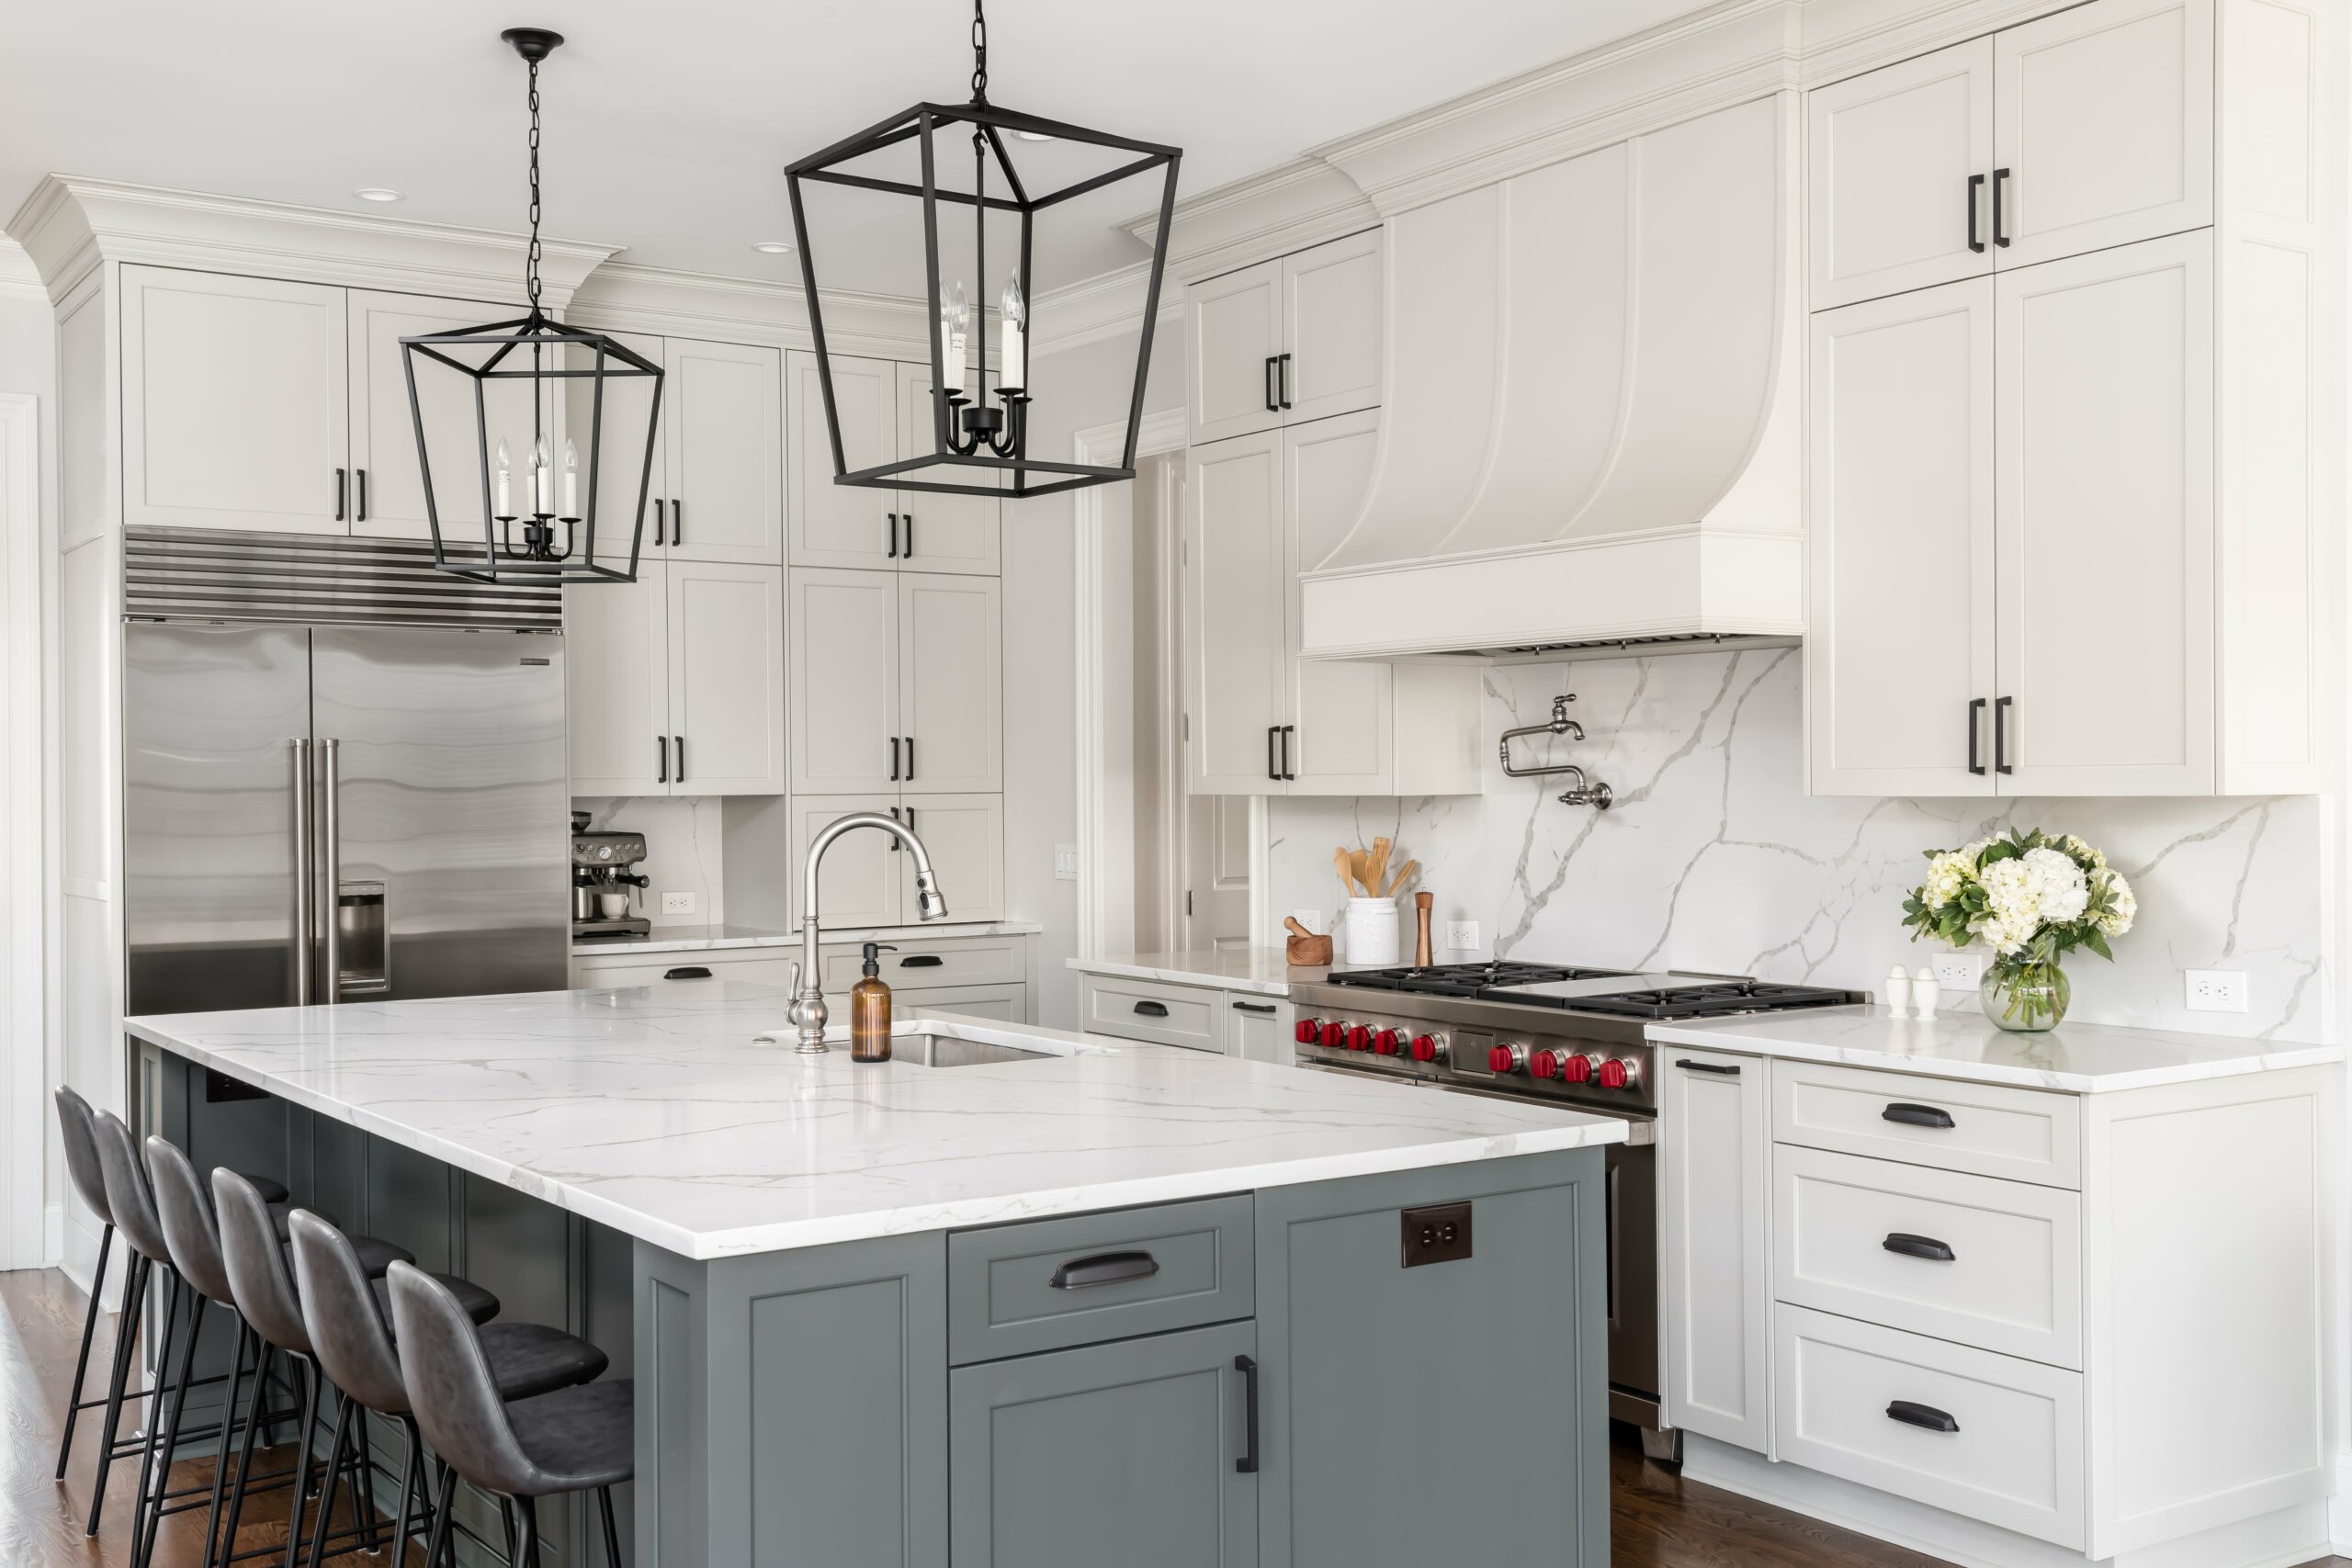 10 Kitchen Trends for 2023